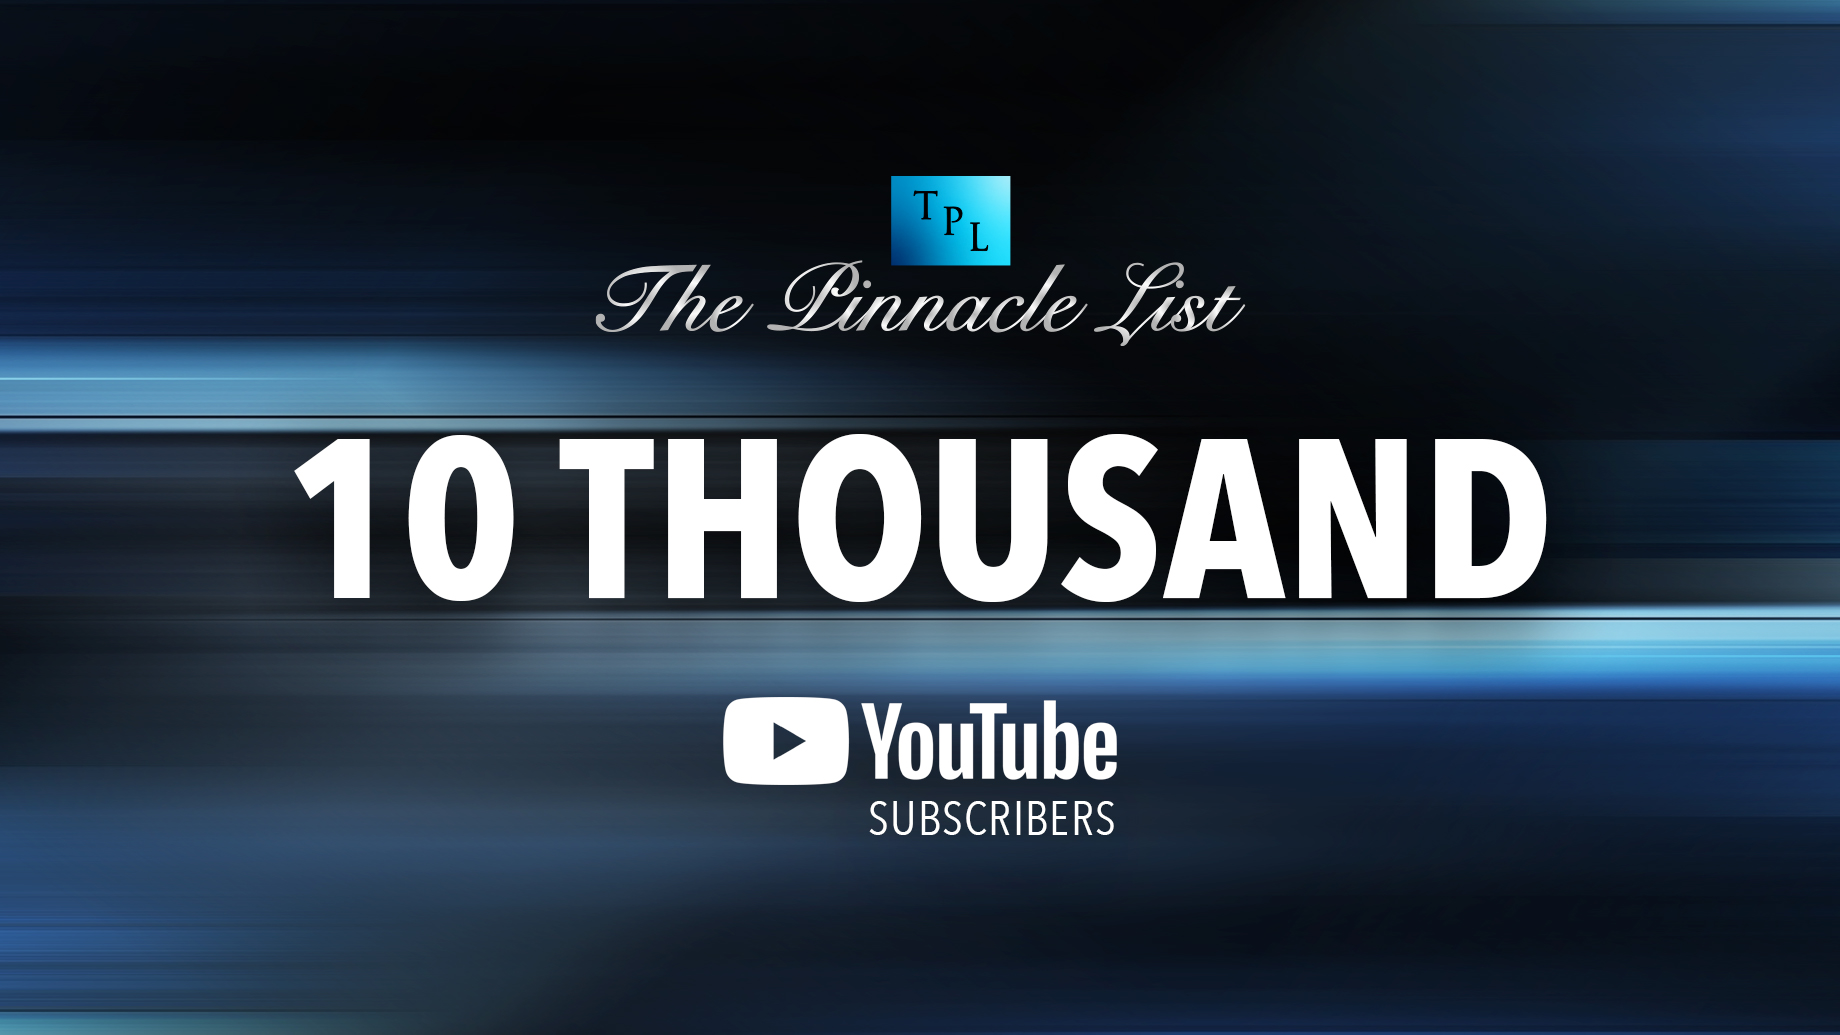 The Pinnacle List - 10,000 YouTube Subscribers